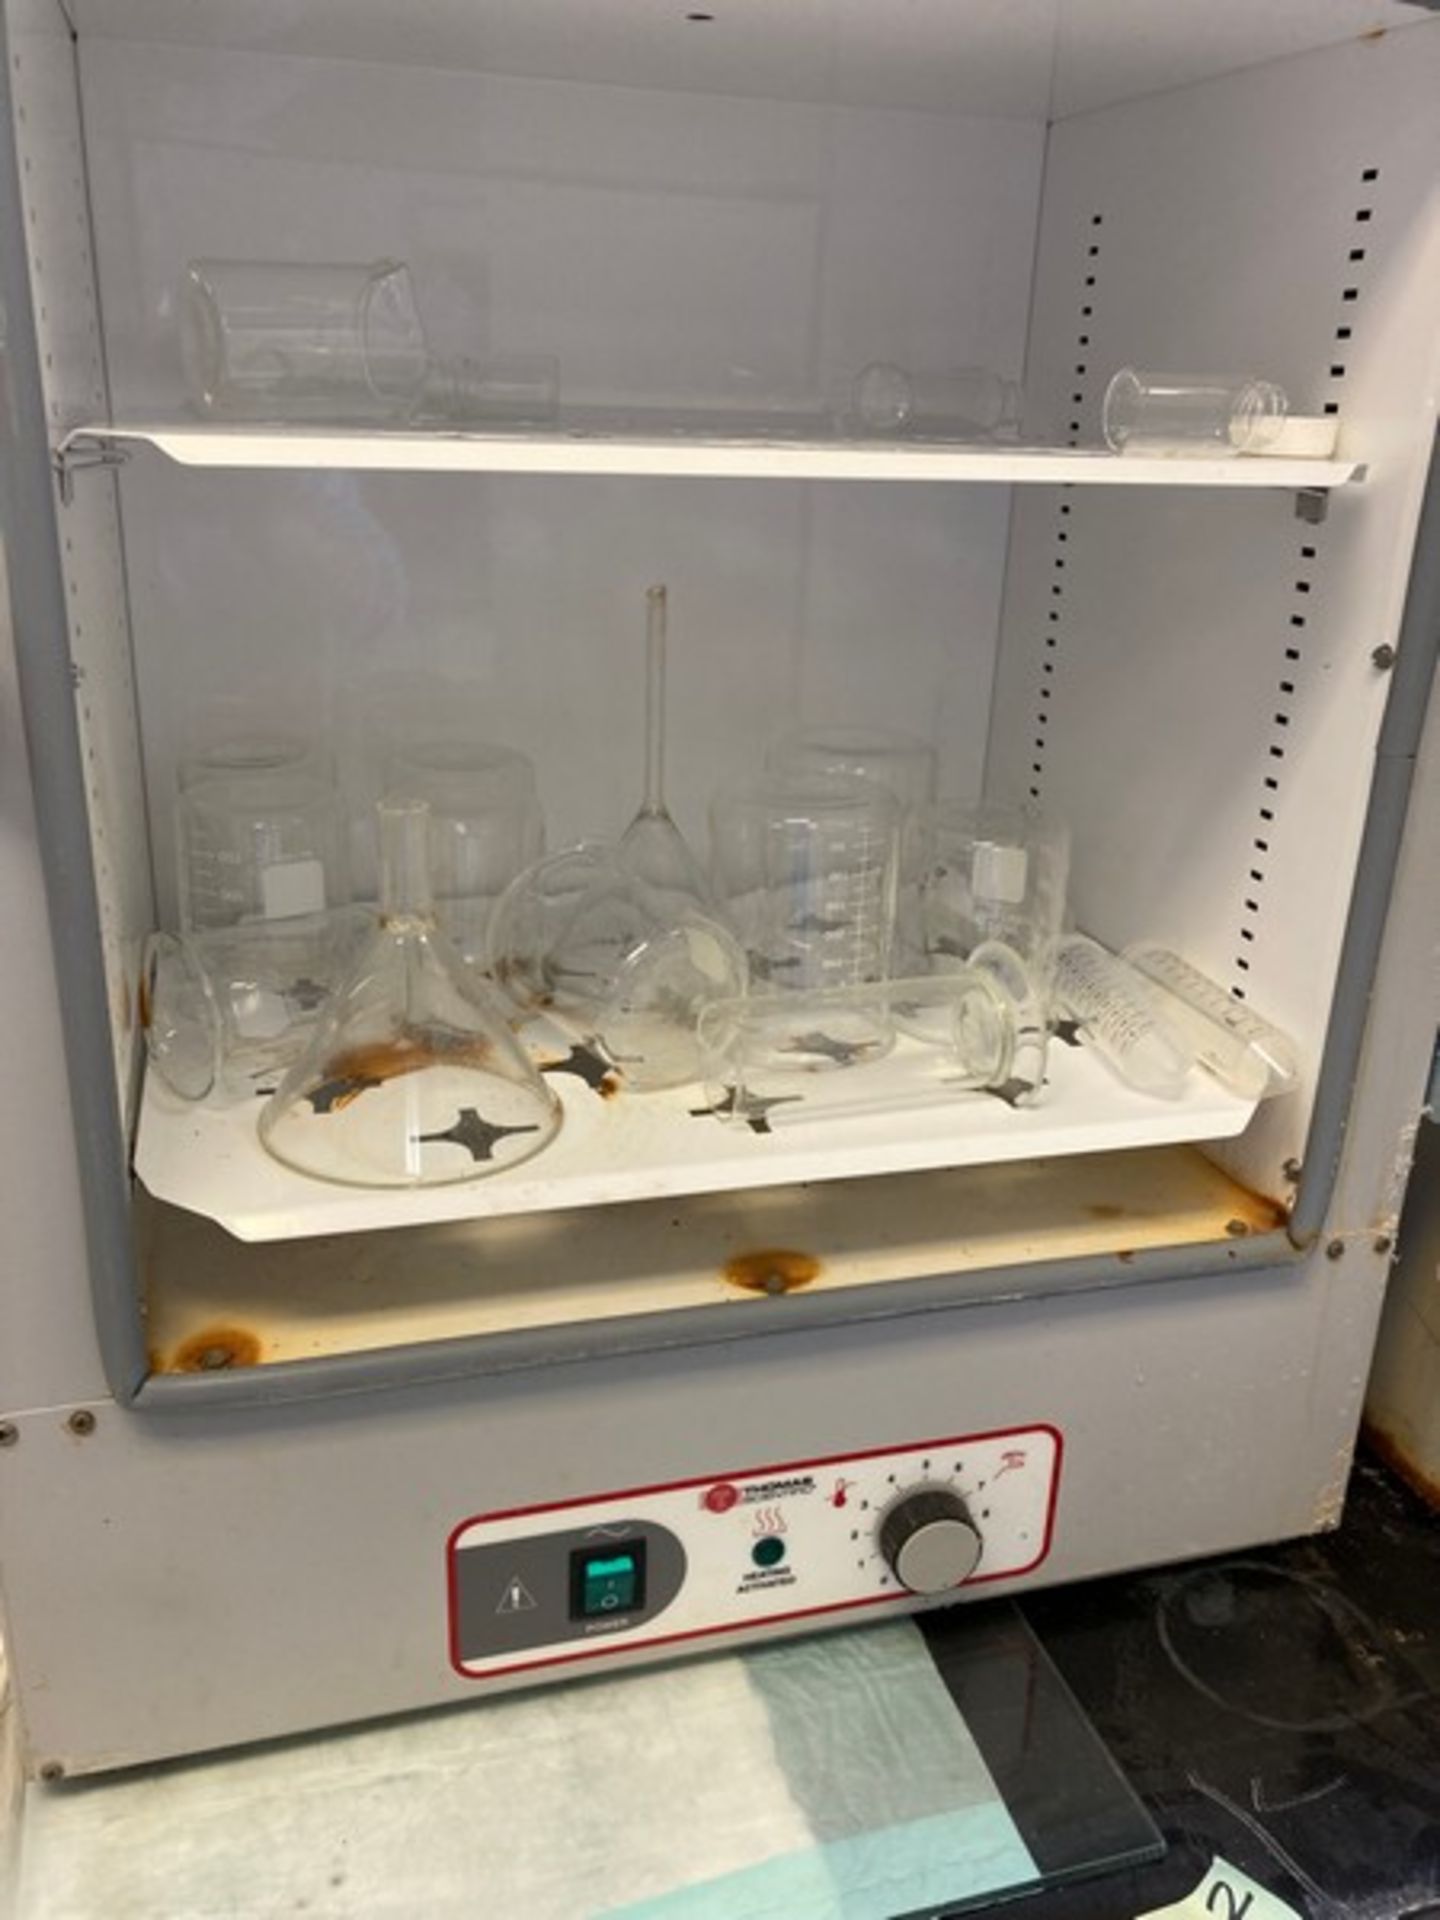 2 Lab items and Glassware: Explosion-Proof Refrigerator - Lab-Line Instruments 3557, 24"Wx24"Dx34. - Image 3 of 4